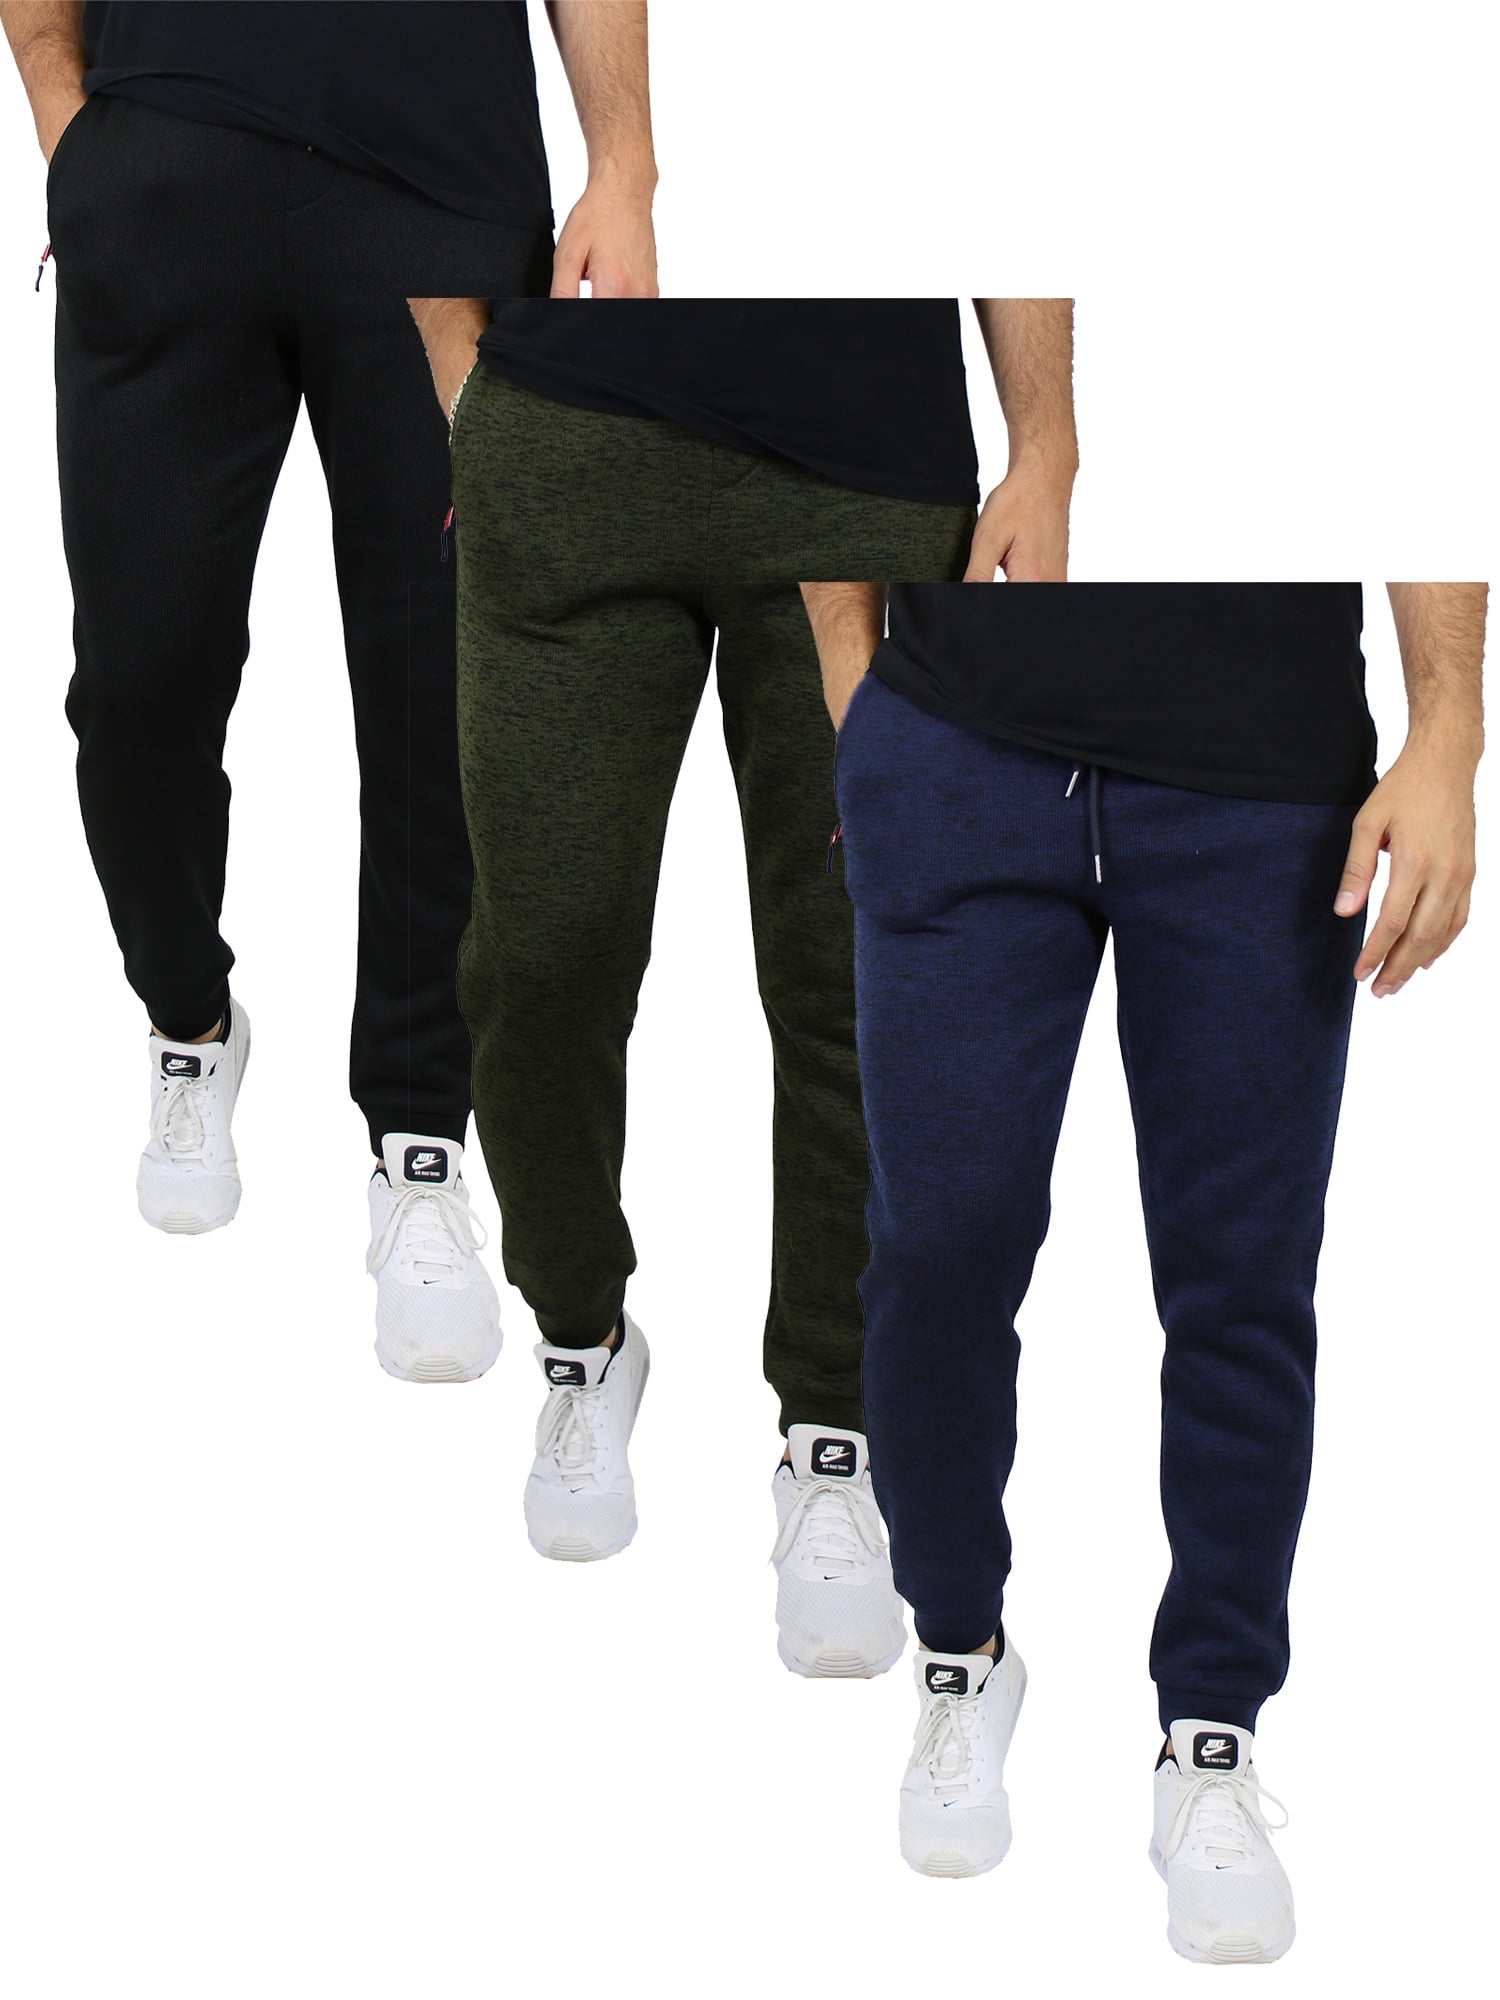 Men\'s Jogger Fleece 3-Pack S-2XL) Terry (Size, & French Slim-Fit